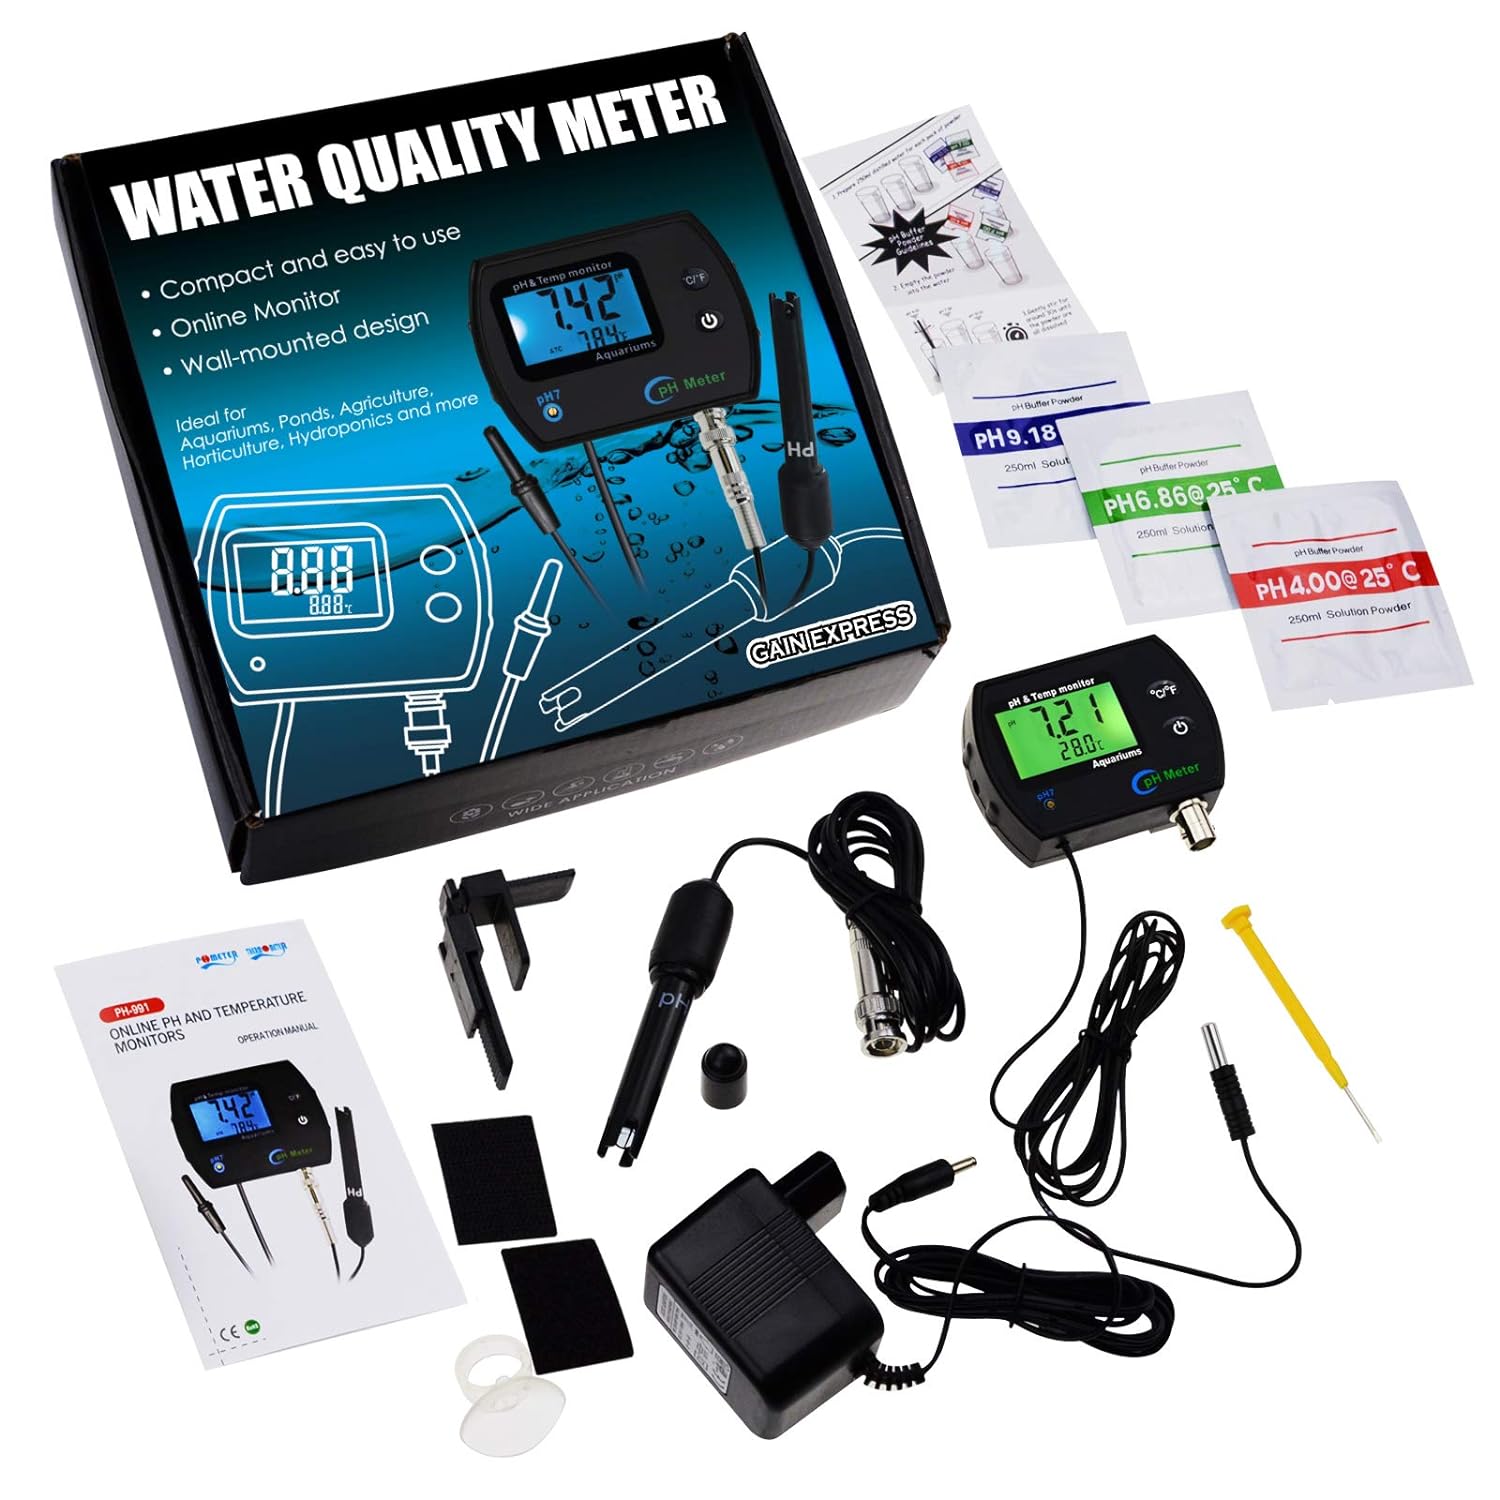 PH  Temperature 2-in-1 Continuous Monitor Meter w/Backlight Replaceable Electrode, Dual Display 0.00~14.00pH °C/ °F Water Quality Monitoring Kit, for Aquariums Hydroponics Pools Tanks Spa